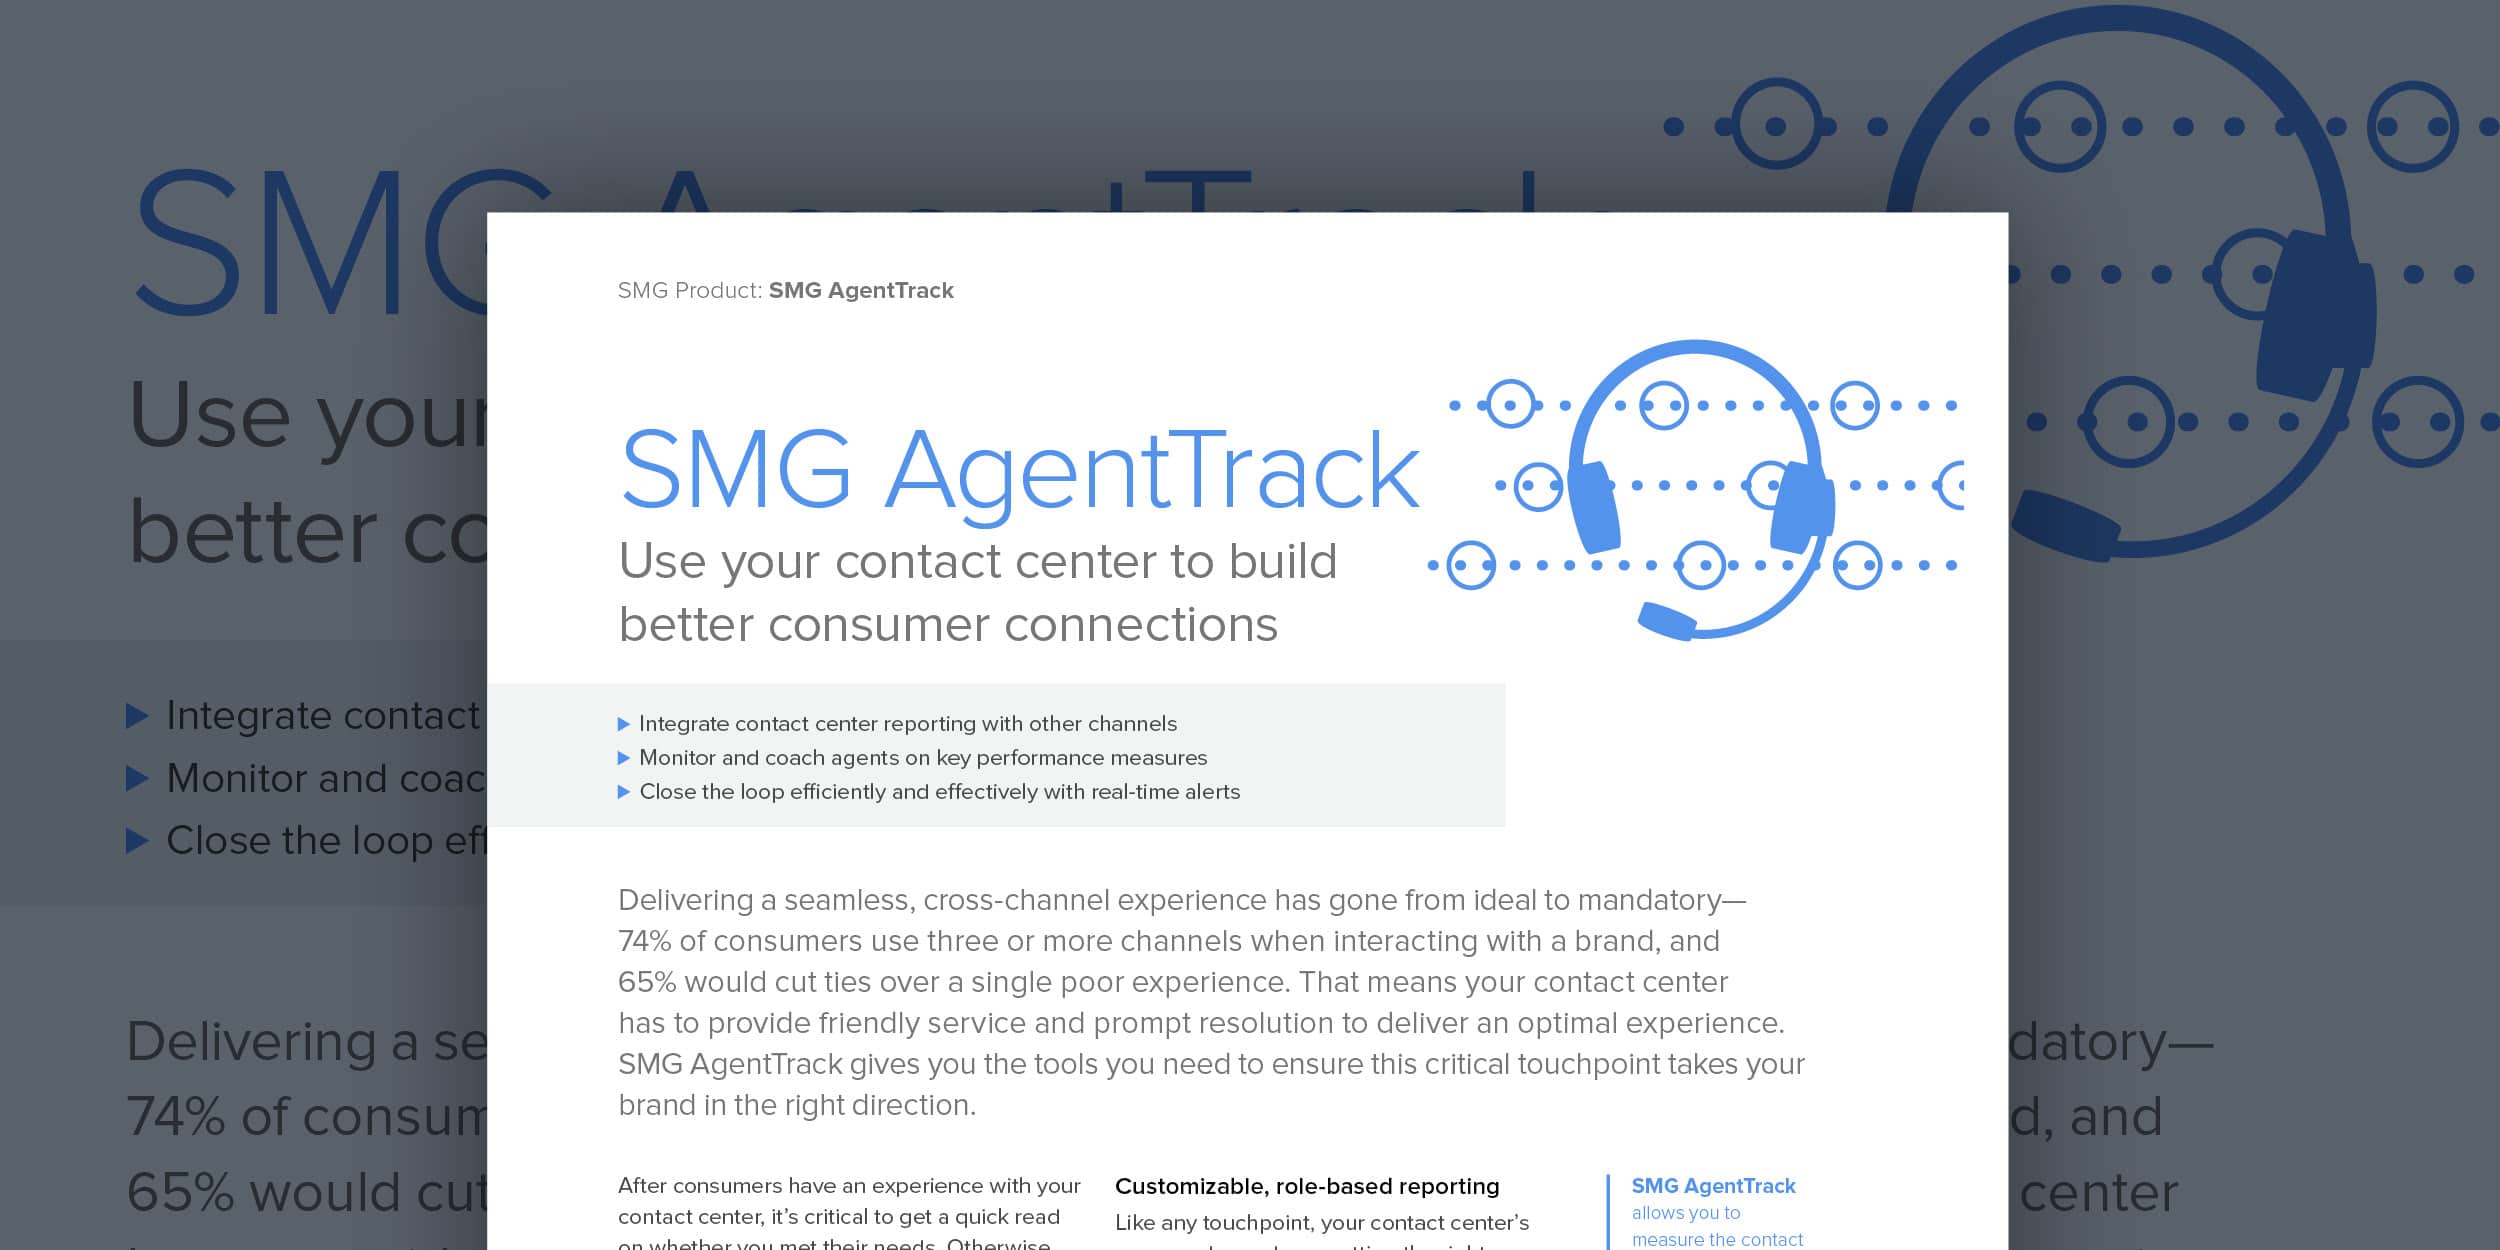 SMG AgentTrack